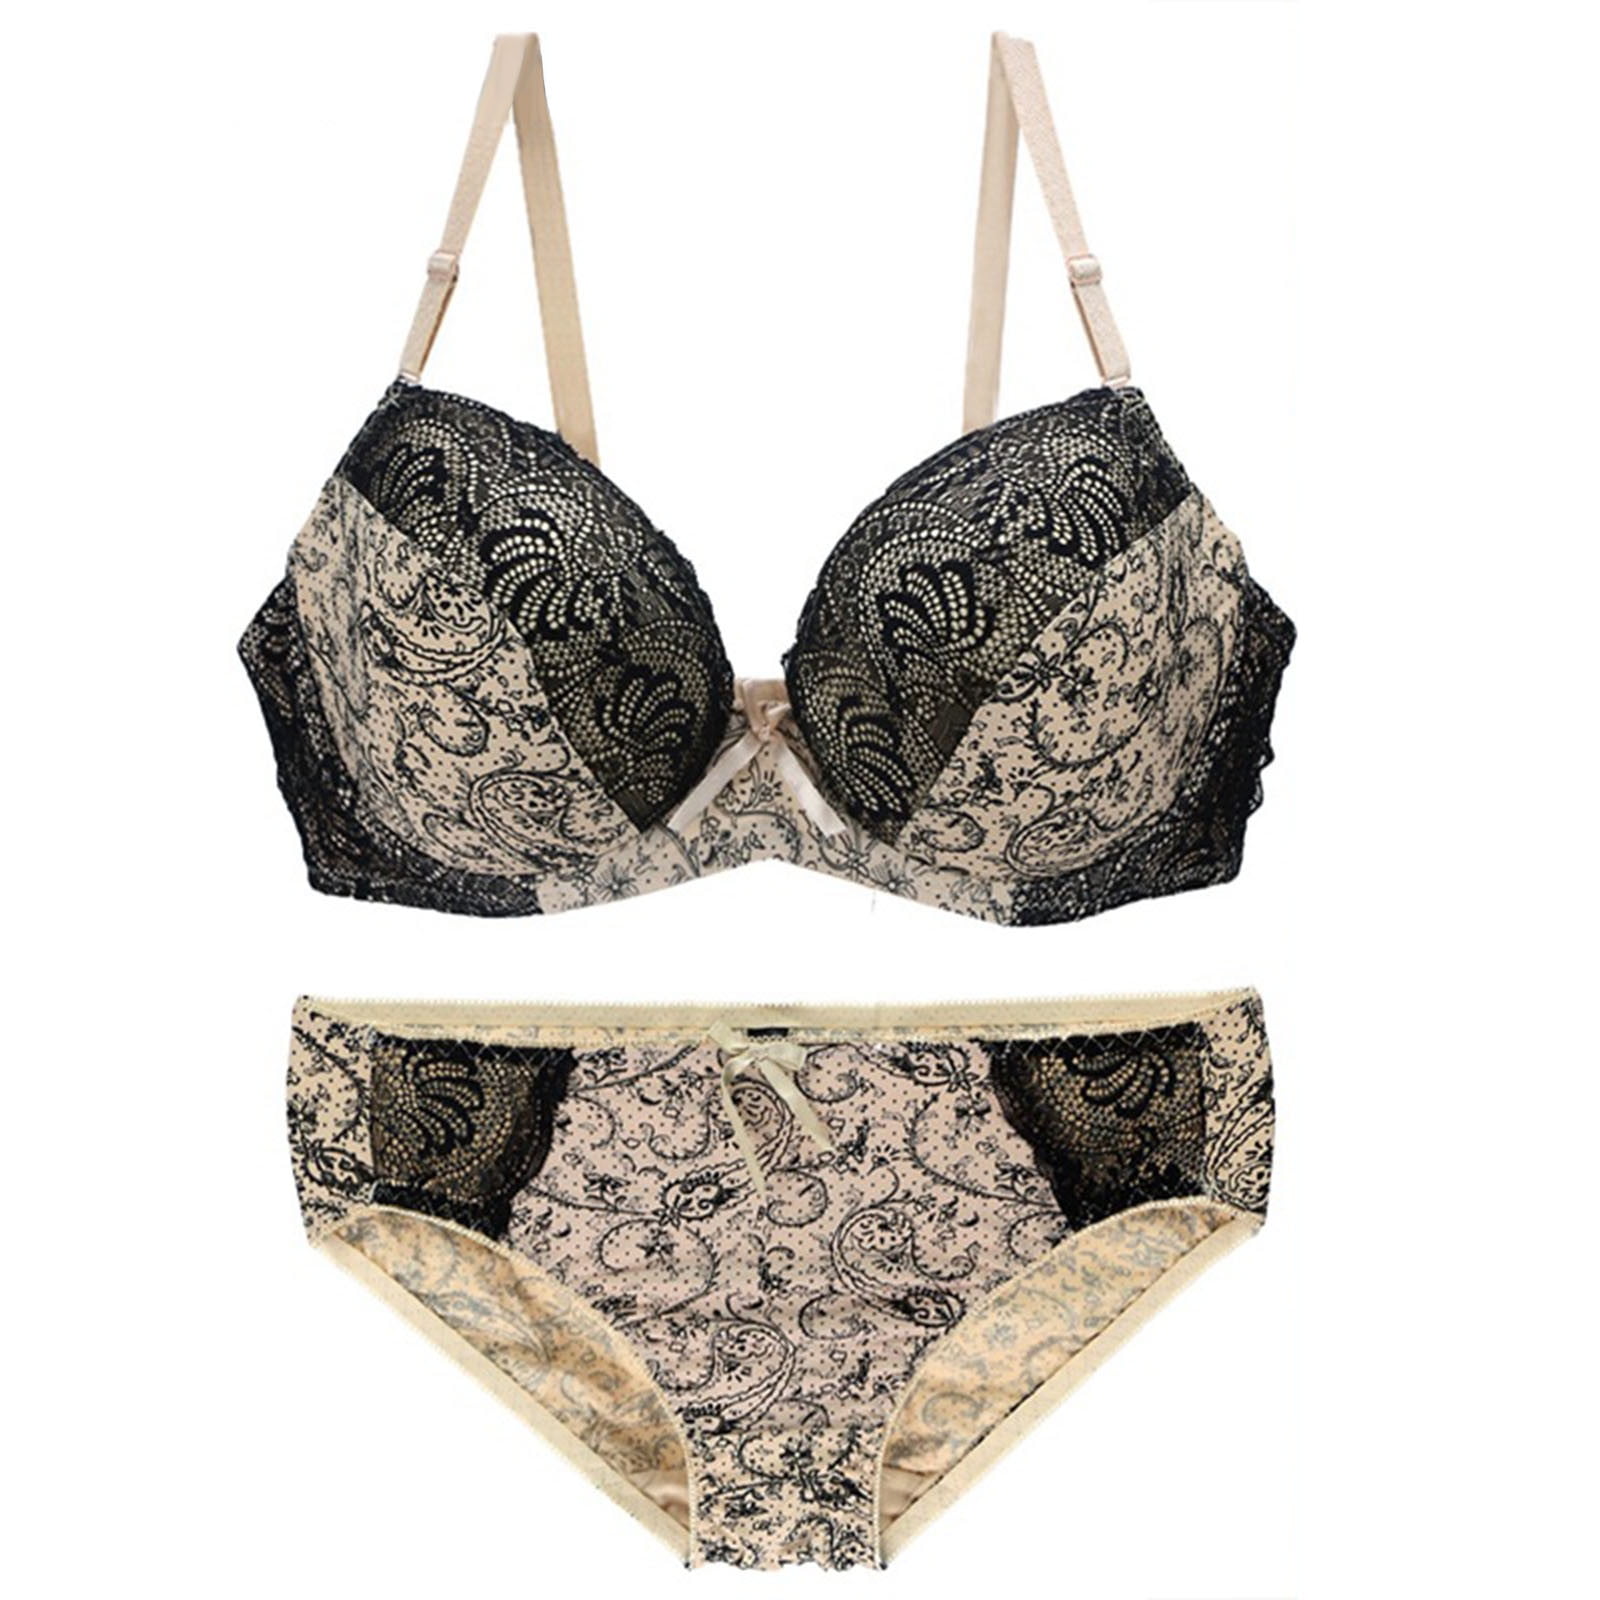 Buy THE LAZZOLICA Women's Front Closure Bras Panty Set Lingeries